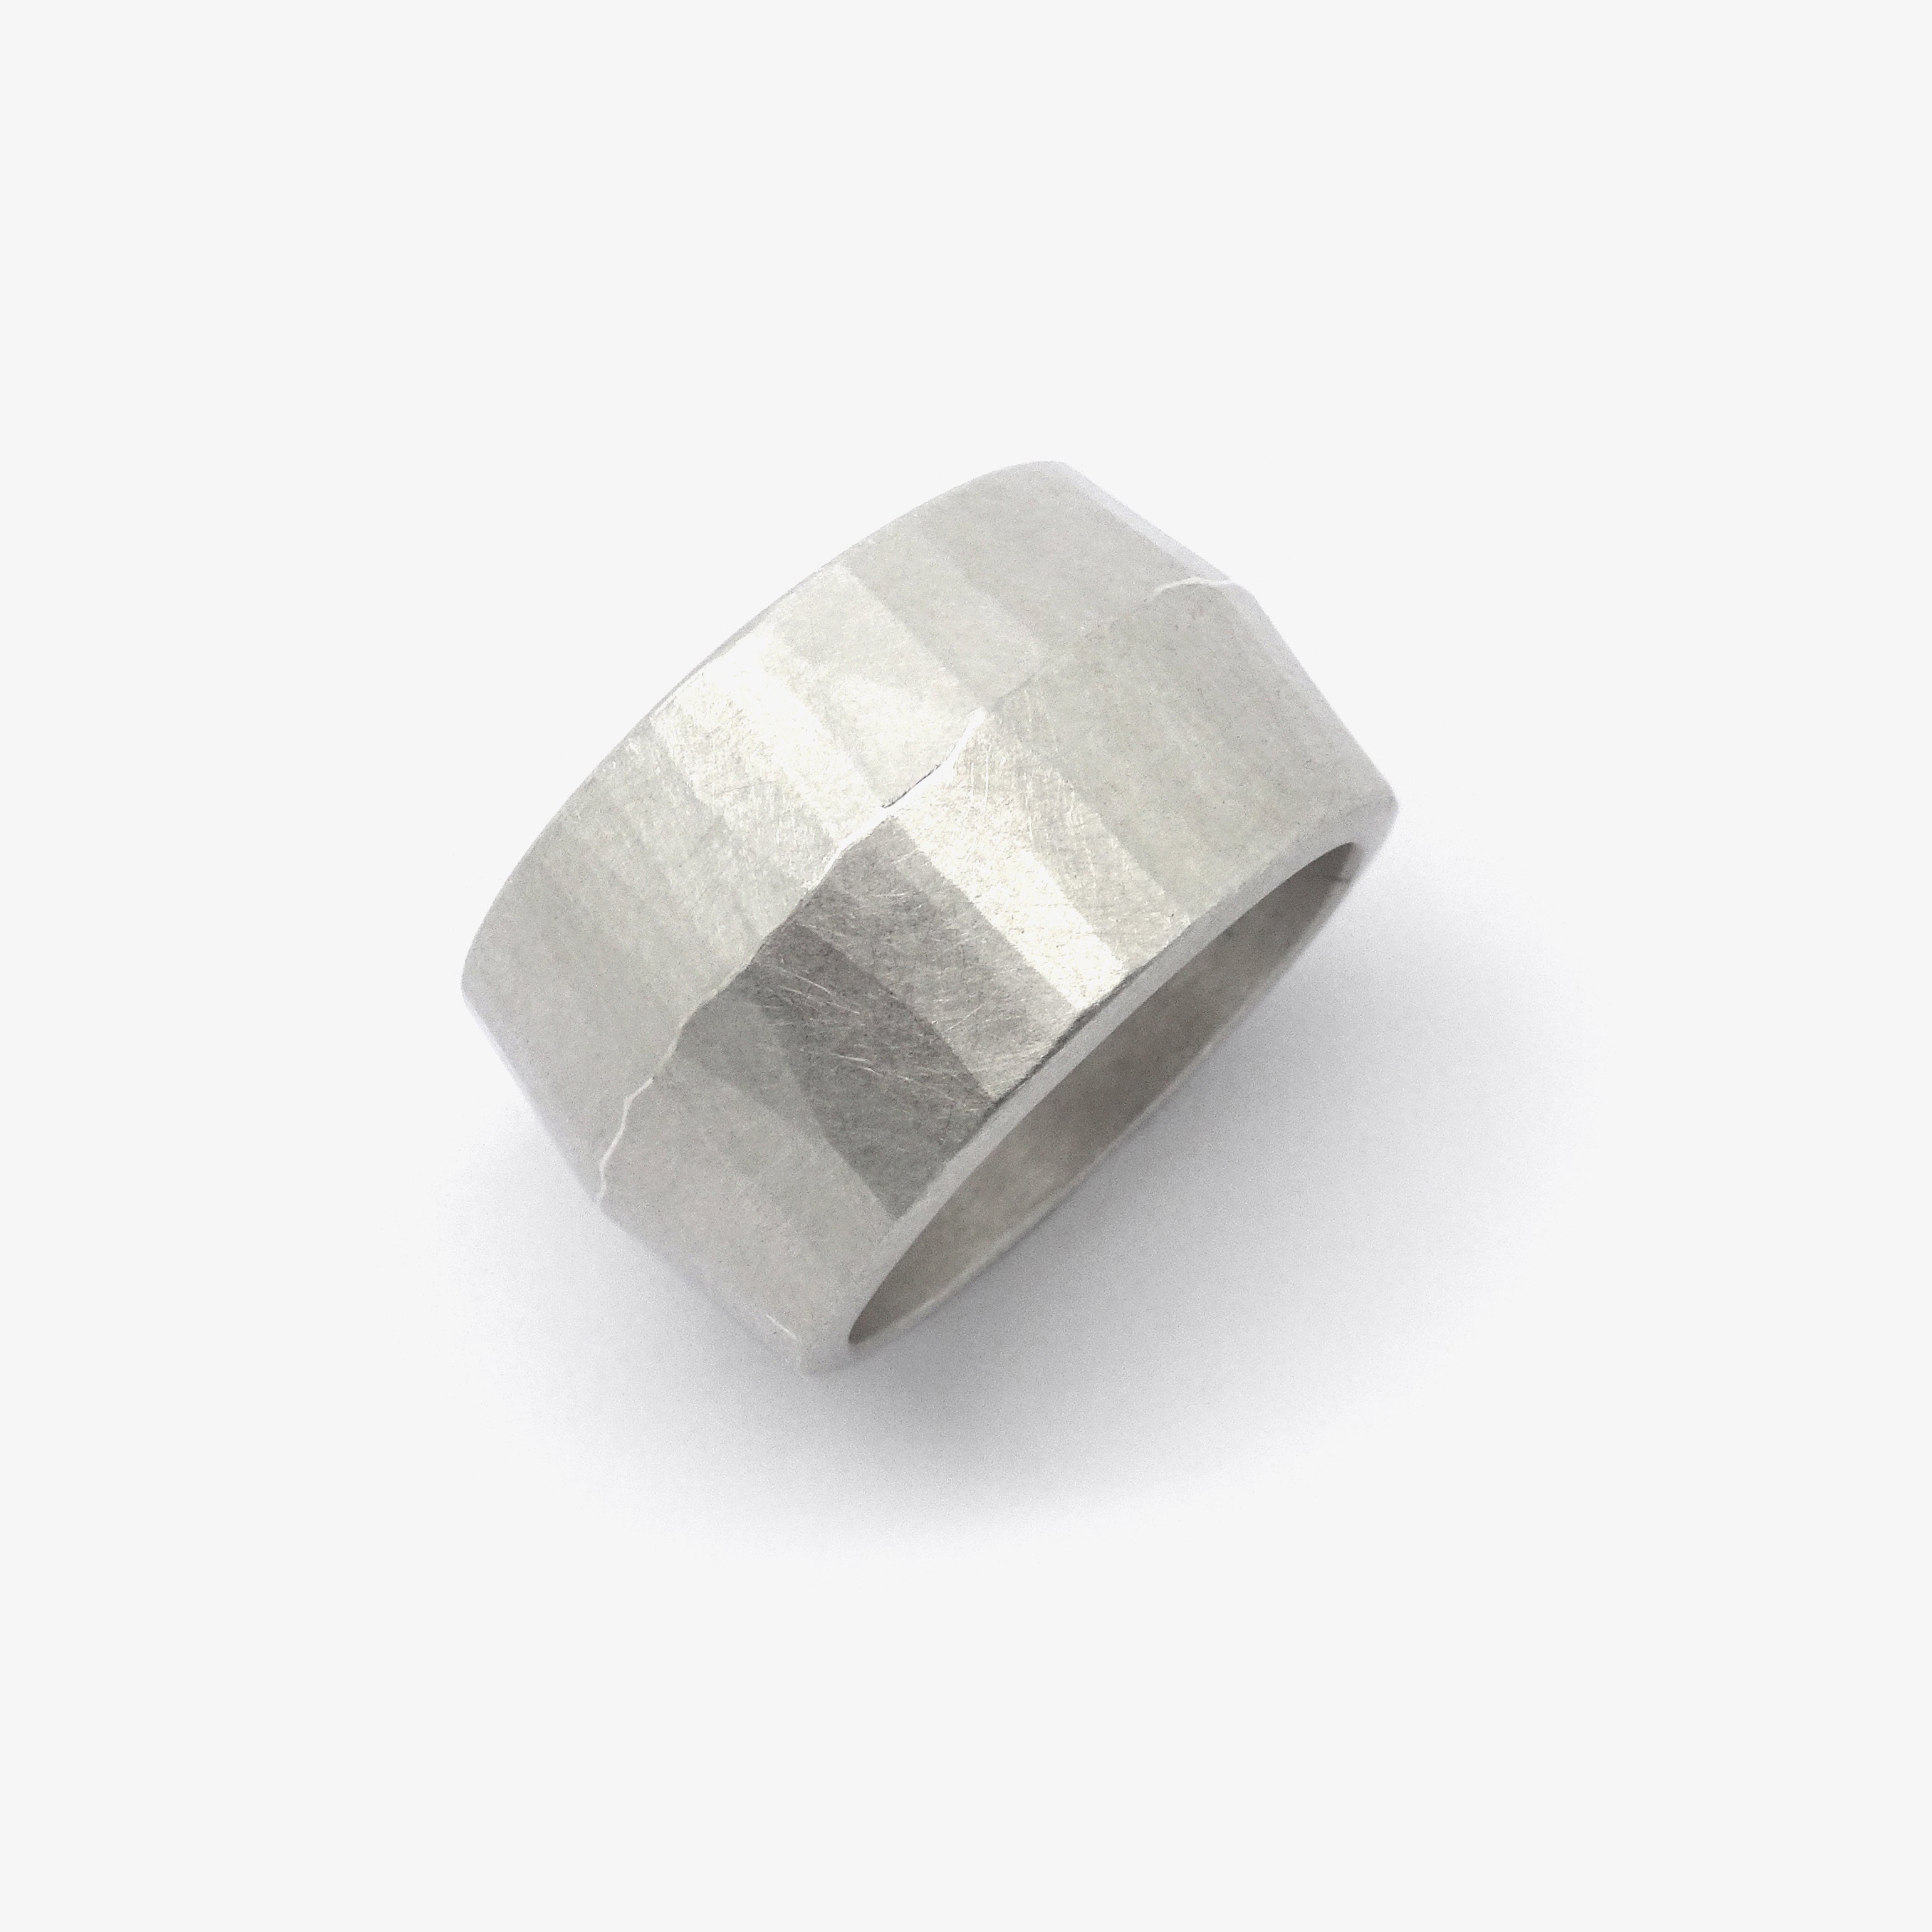 FINEMETAL RING - SILVER 14MM